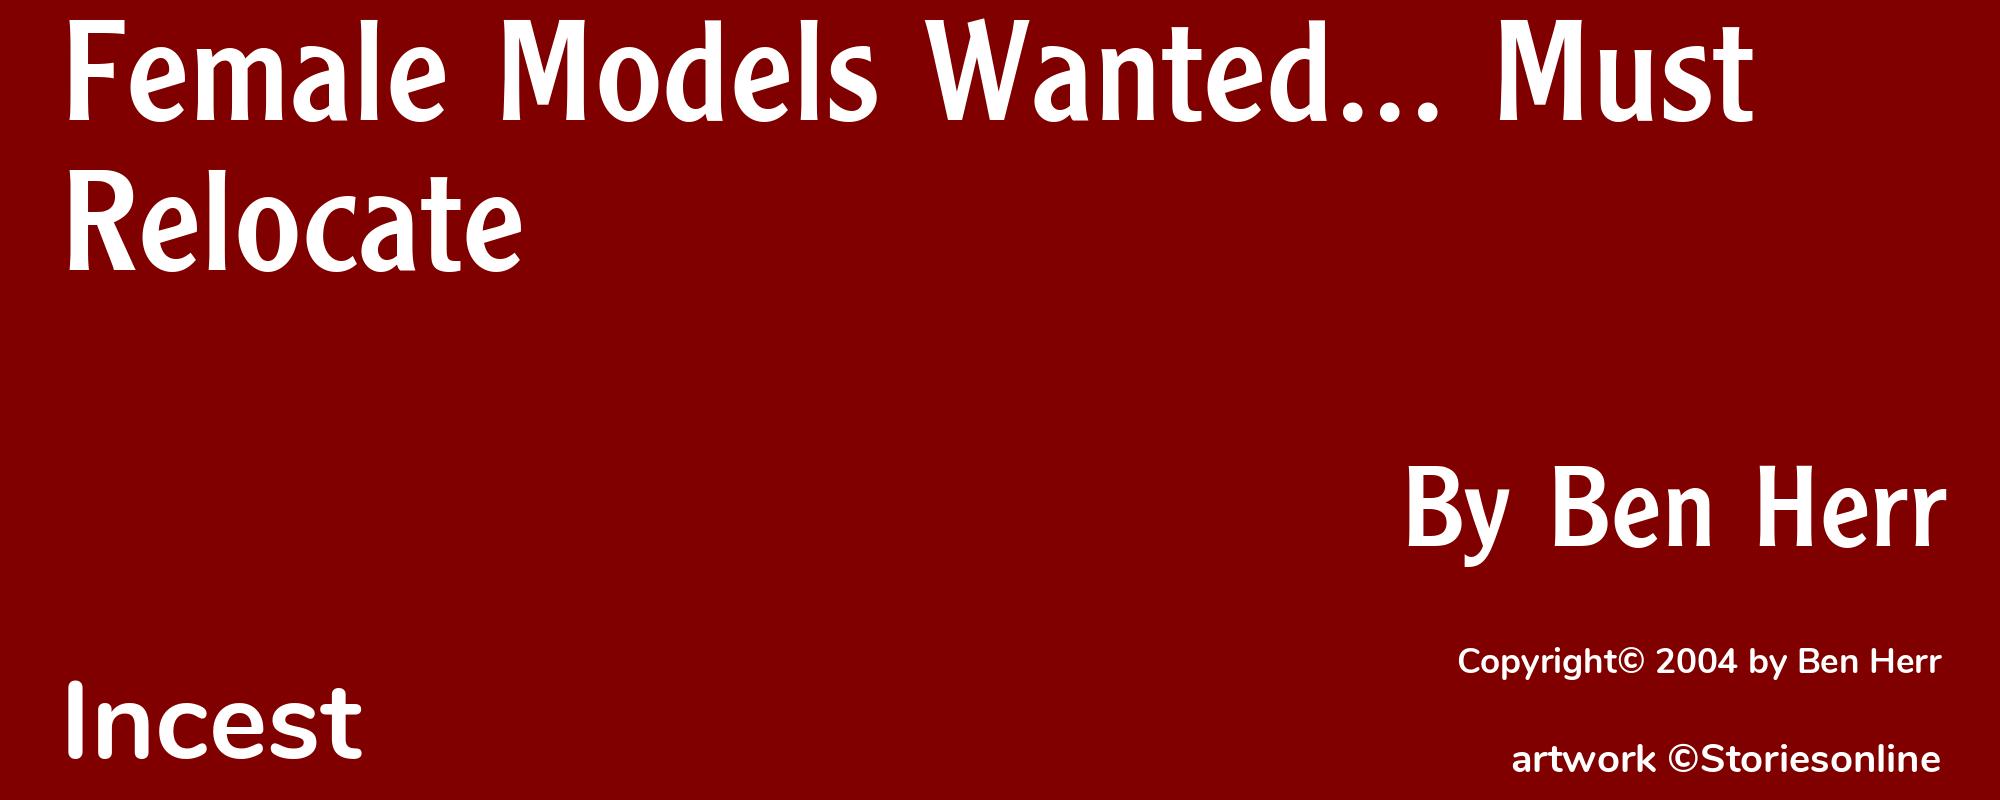 Female Models Wanted... Must Relocate - Cover